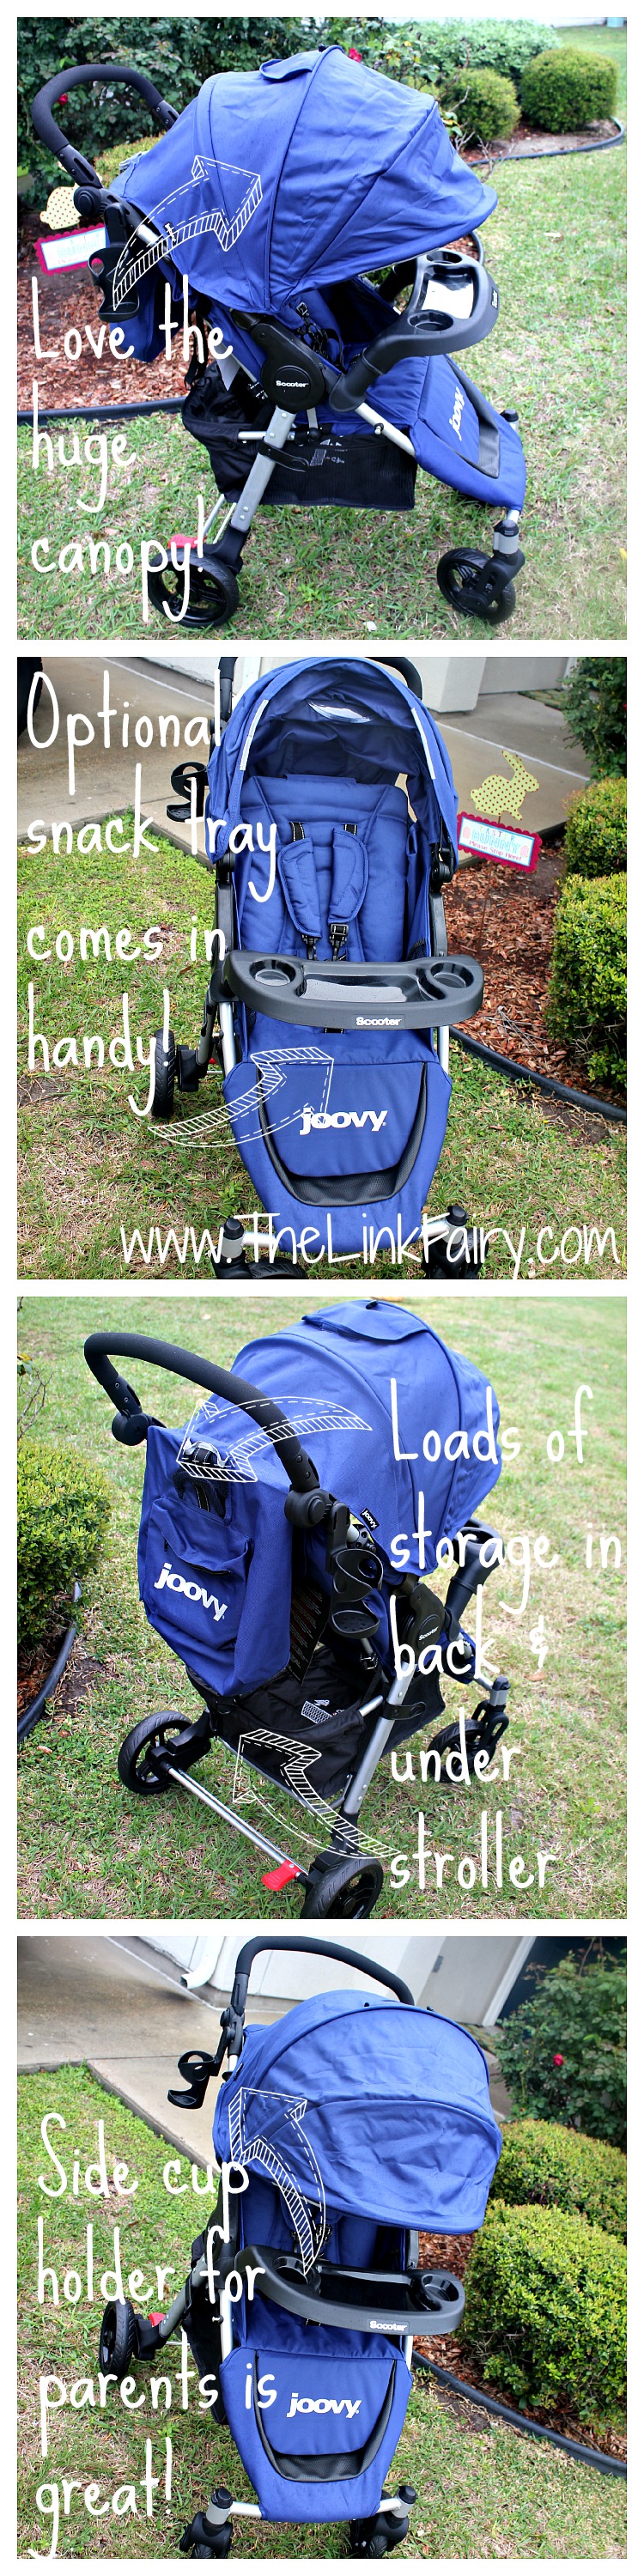 New Joovy Scooter Review